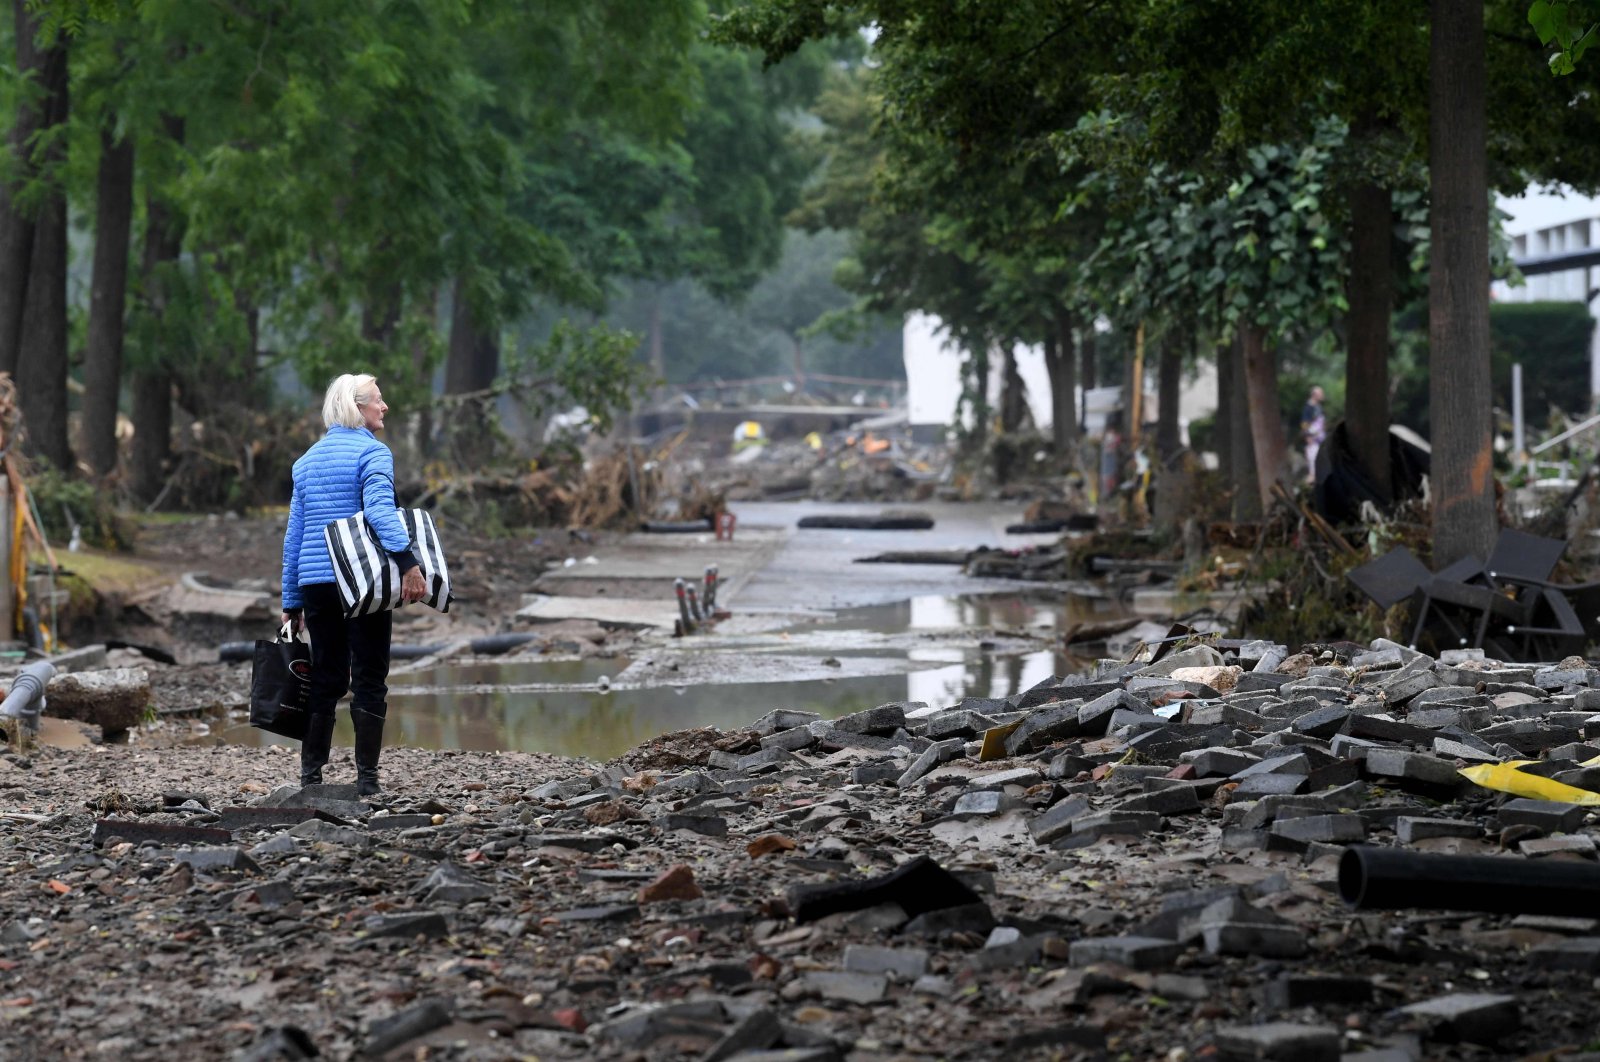 A woman carries bags in a devastated street after floods caused major damage in Bad Neuenahr-Ahrweiler, western Germany, July 16, 2021. (AFP Photo)